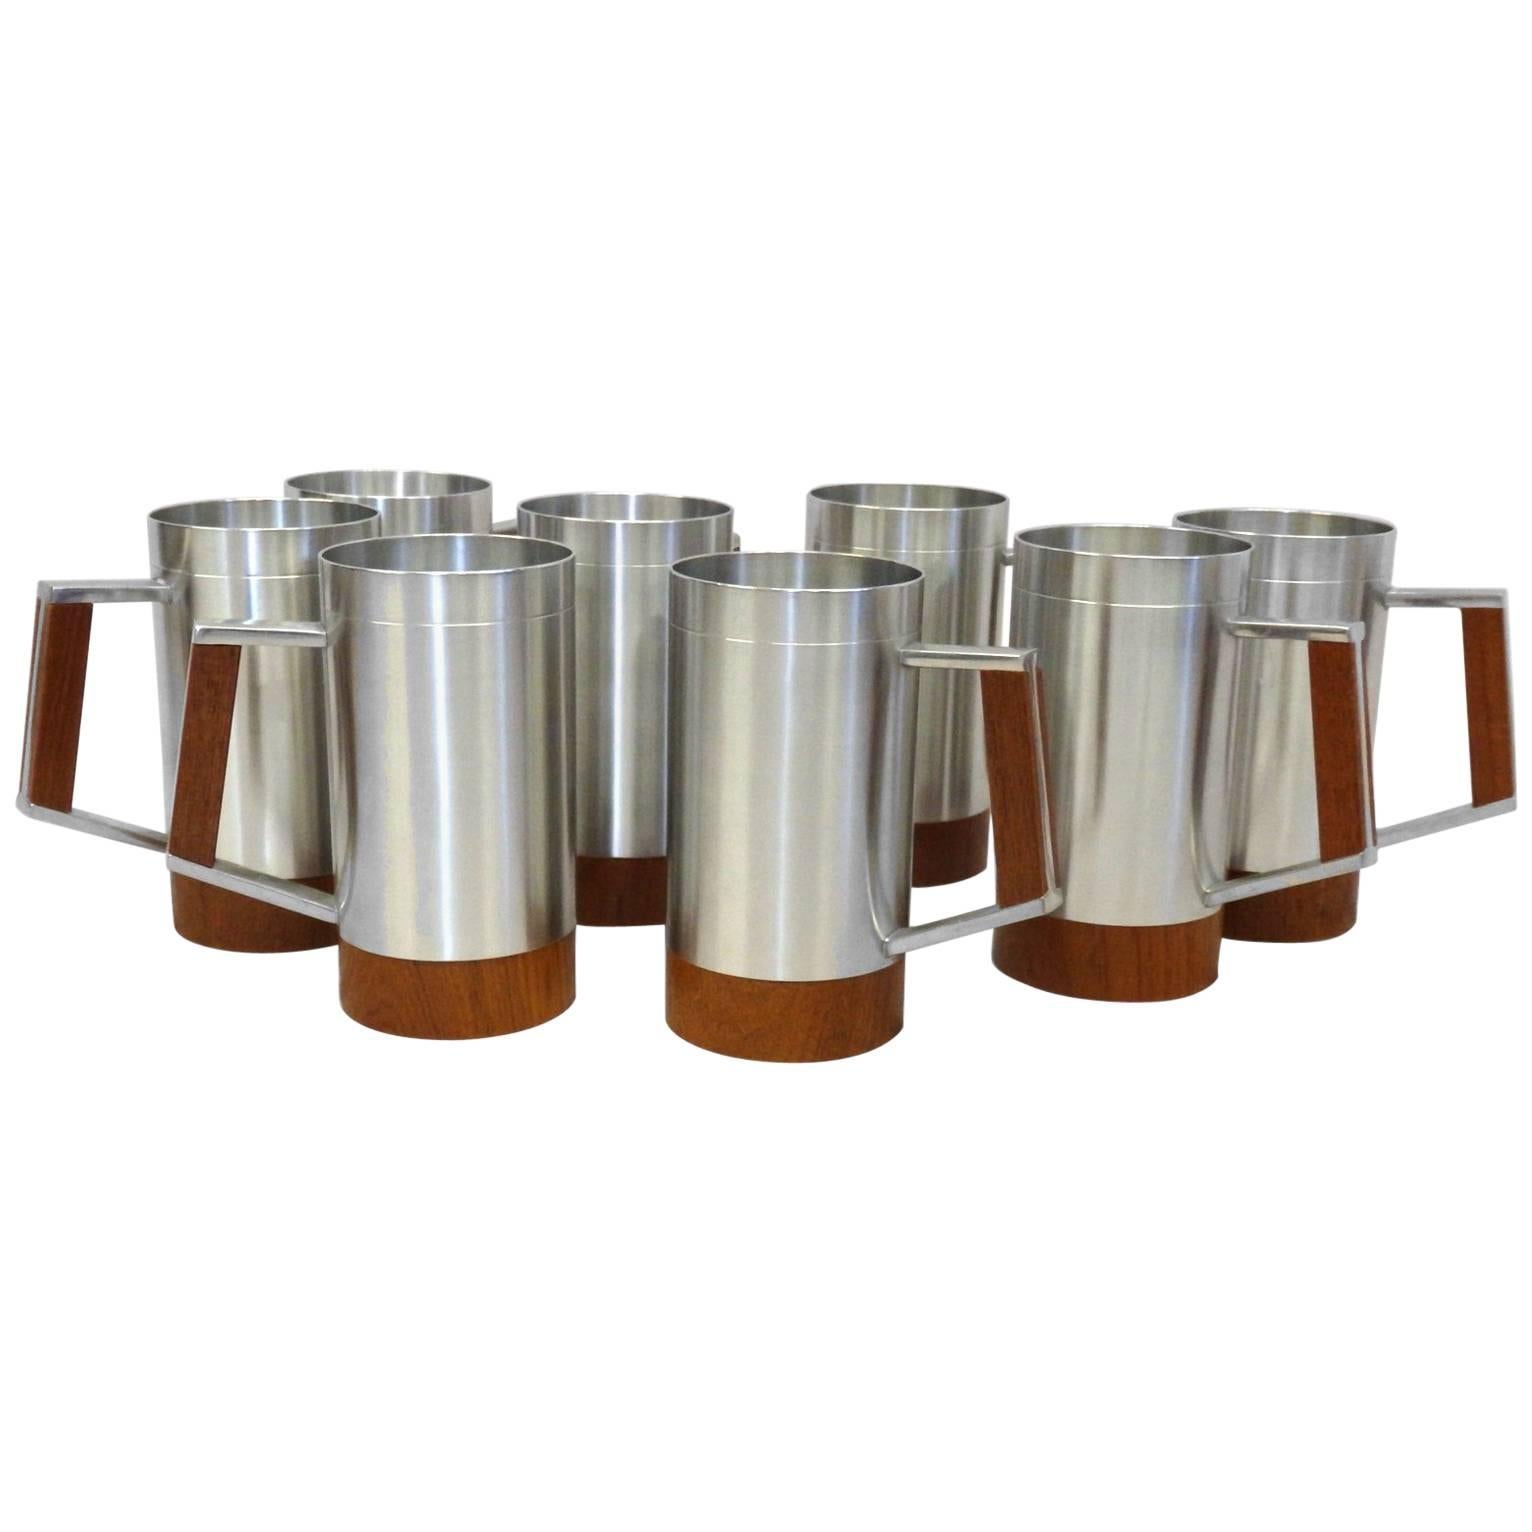 Eight Dansk style Modernist Pewter with Teak Moscow Mule Cups or Mugs